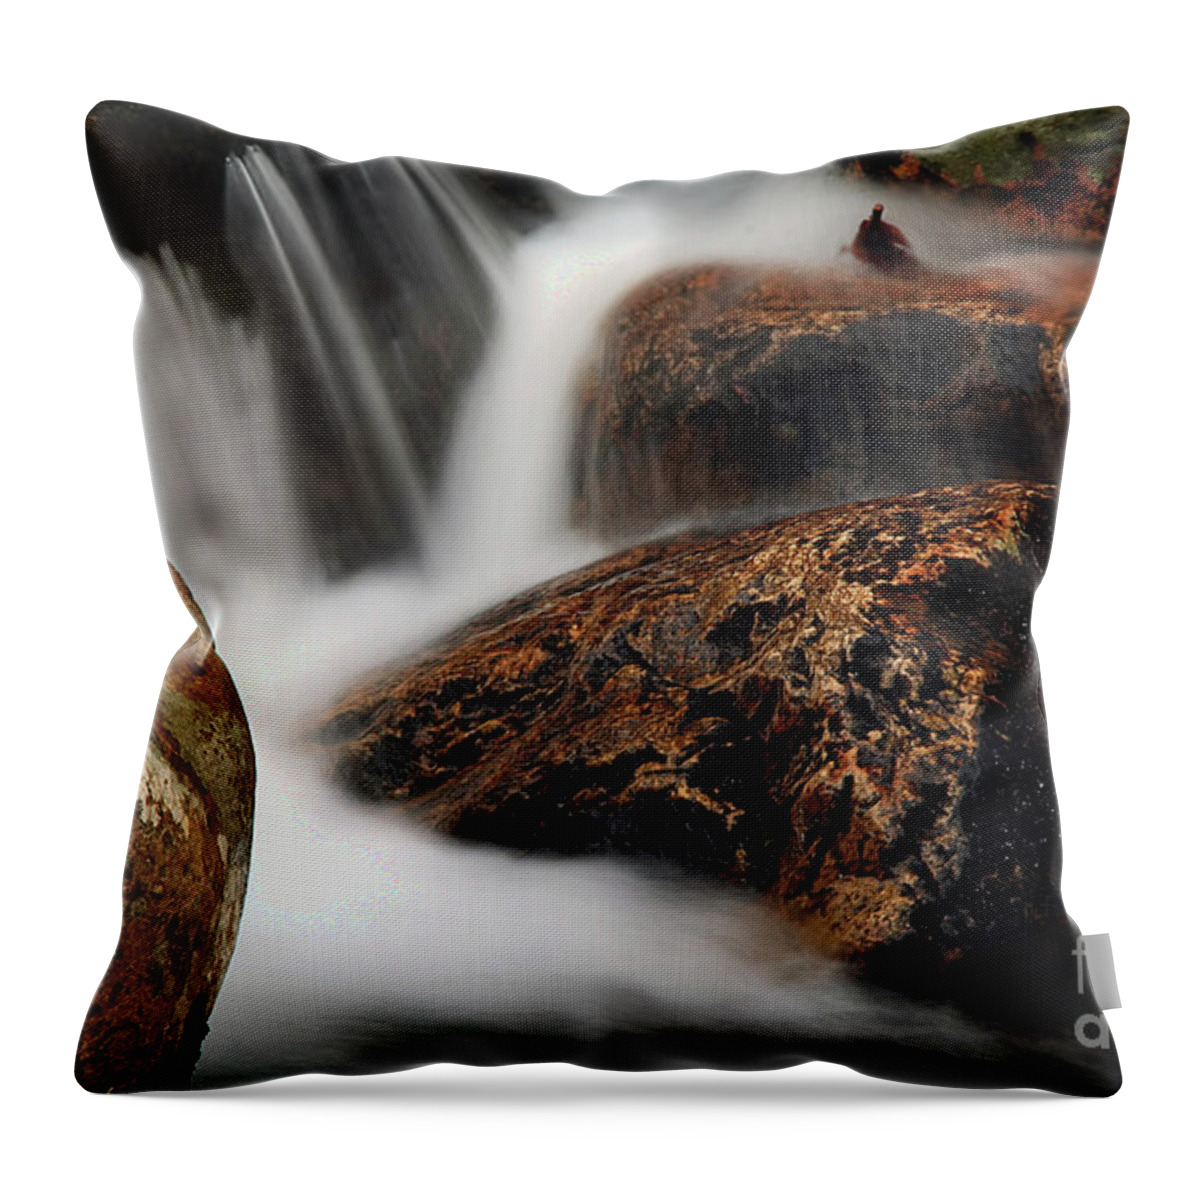 Moving Along Throw Pillow featuring the photograph Moving Along by Darren Fisher